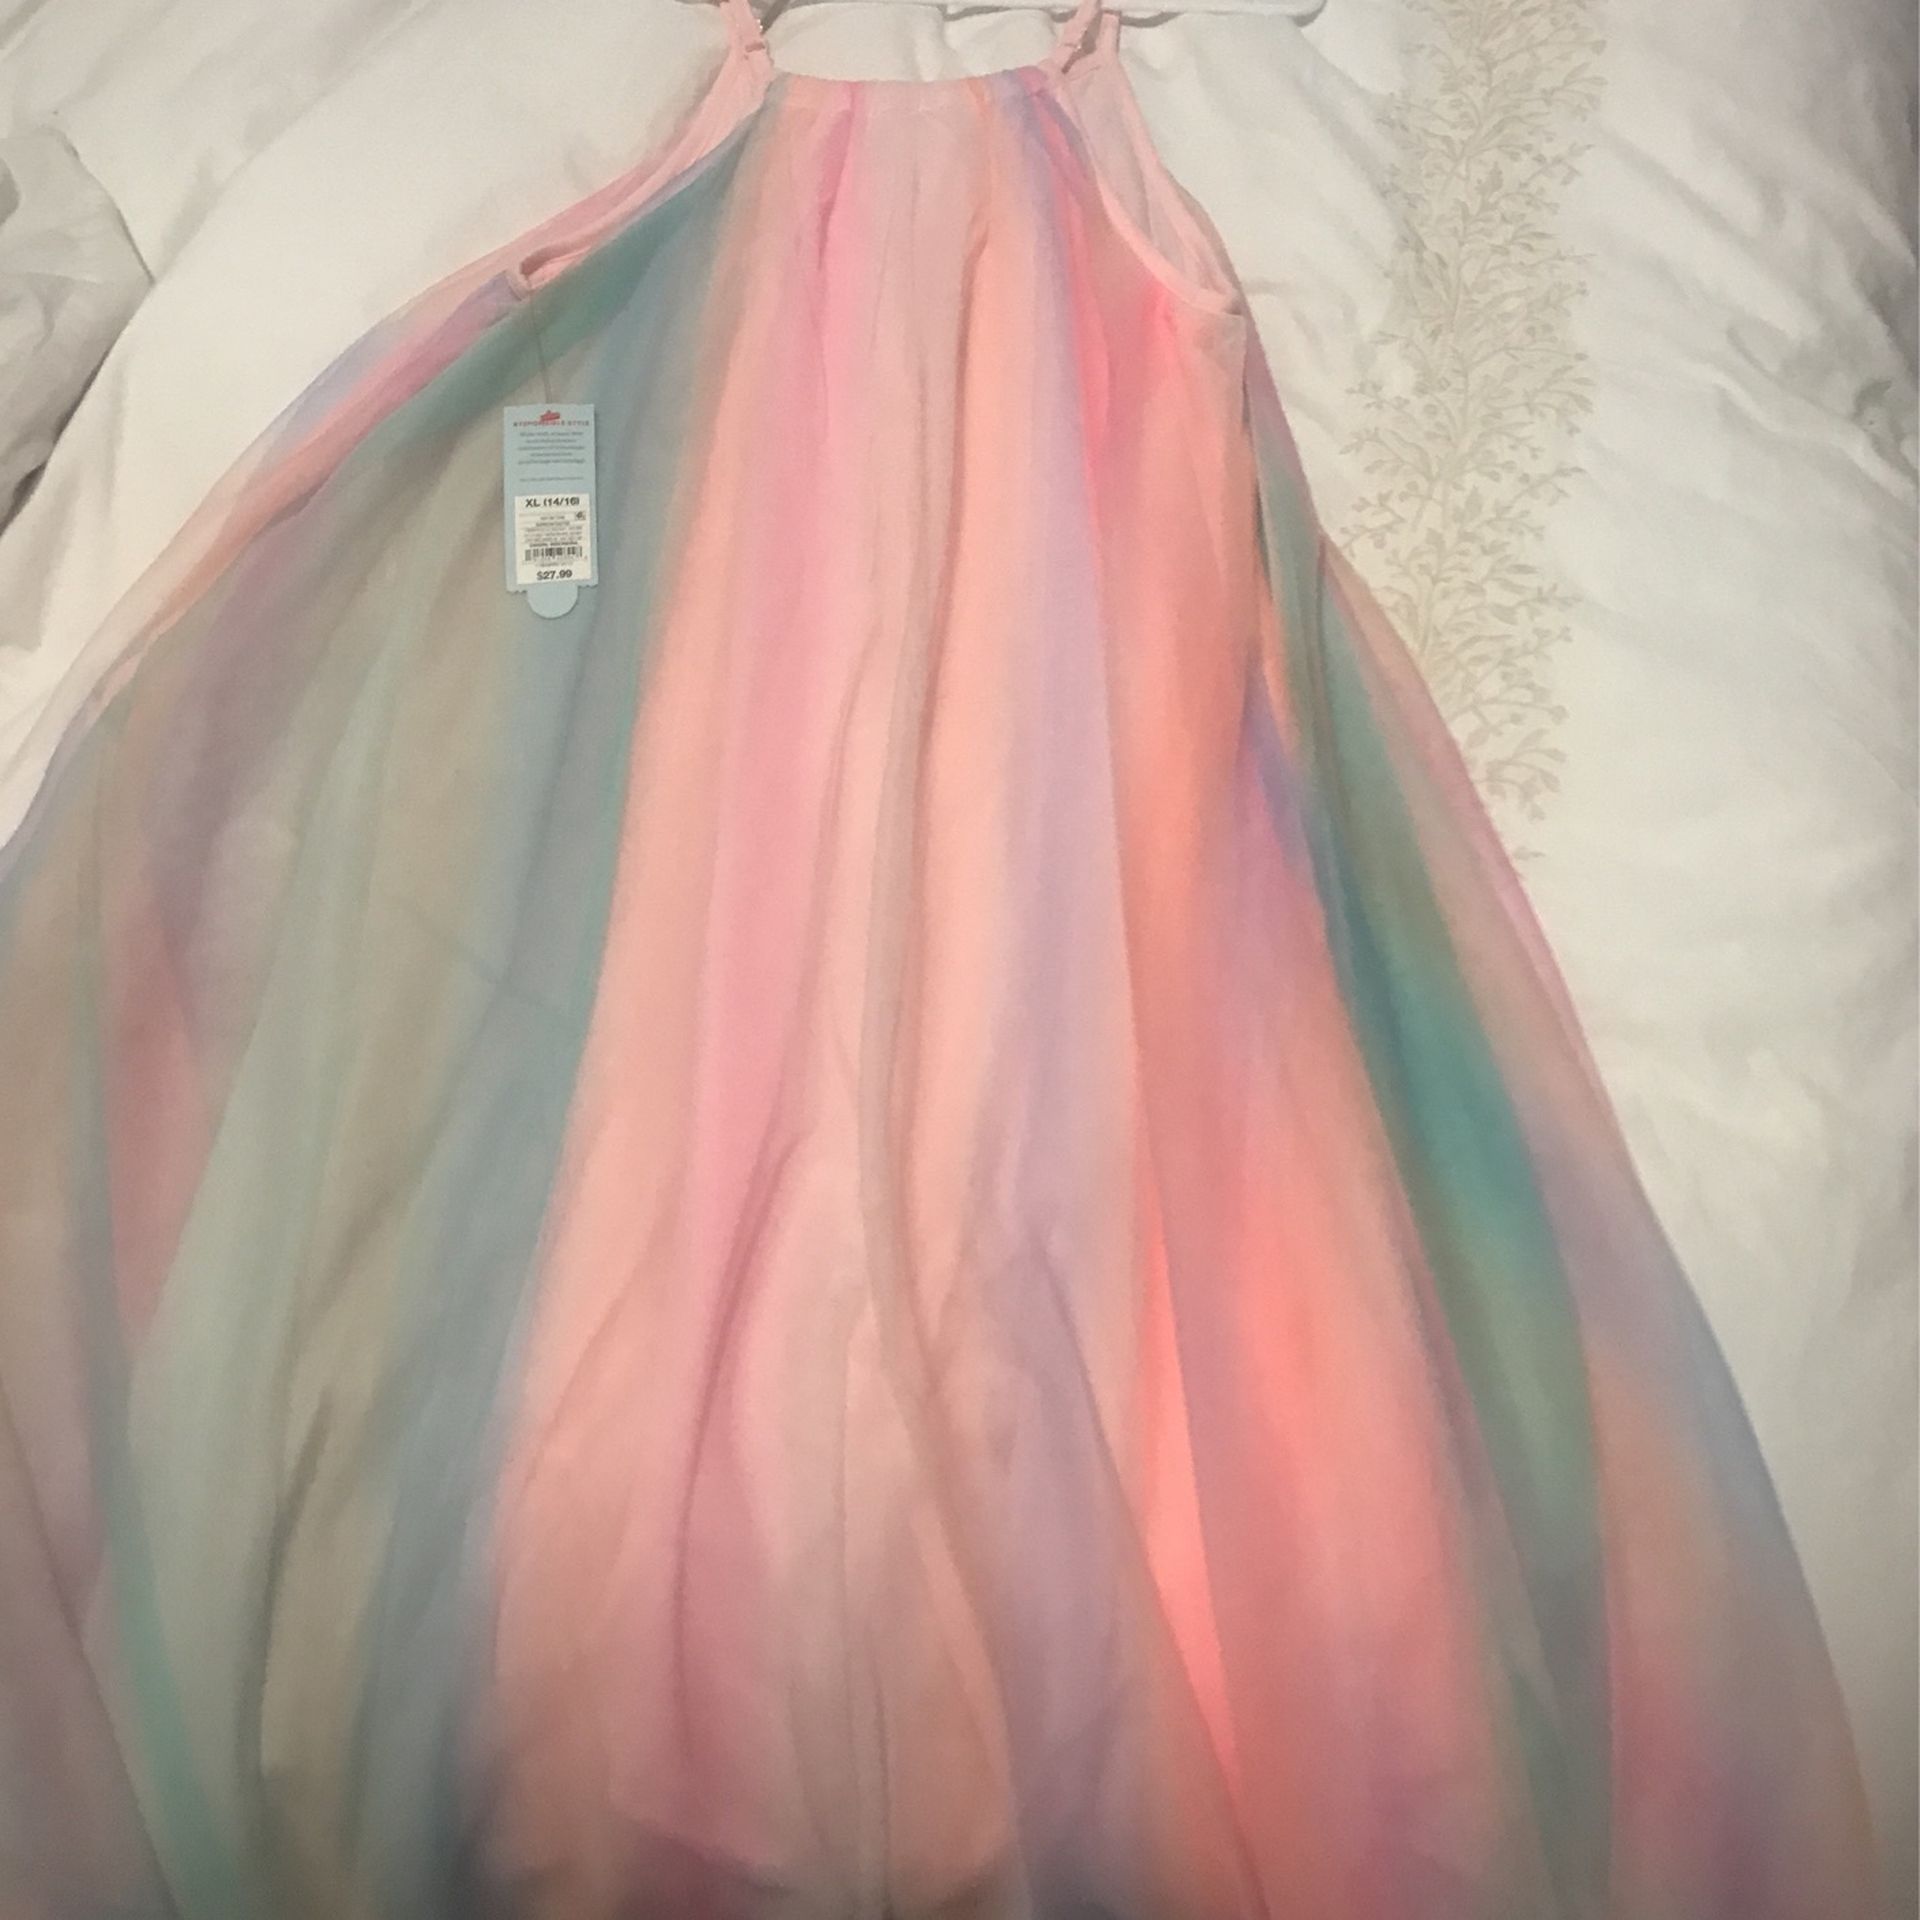 Rainbow gorgeous dress for birthday parties to sleep in I would love this but it doesn’t fit